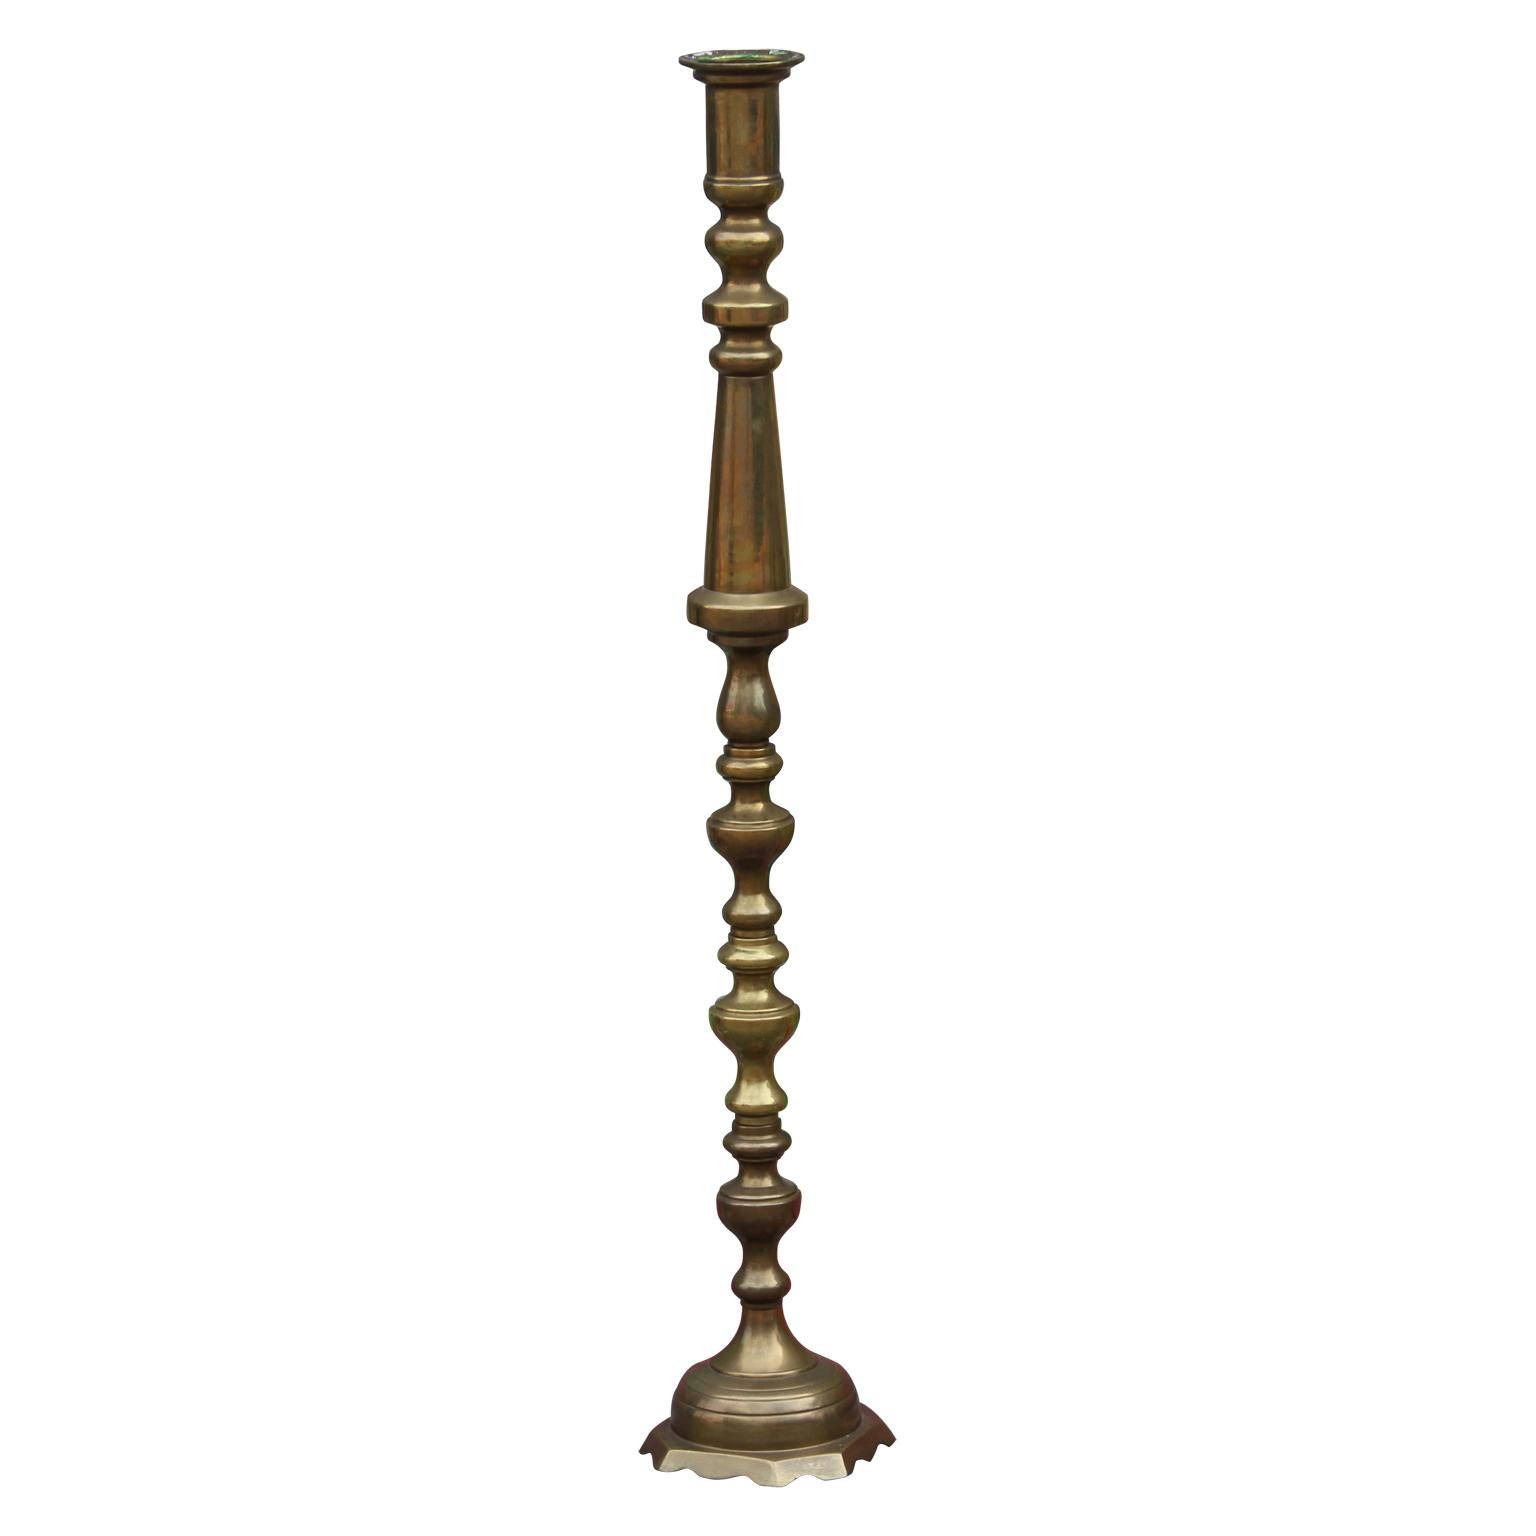 Elegant pair of tall brass candlesticks from the mid-20th century. One of the candlesticks has a carving in cursive for the Lions of District 2T3.